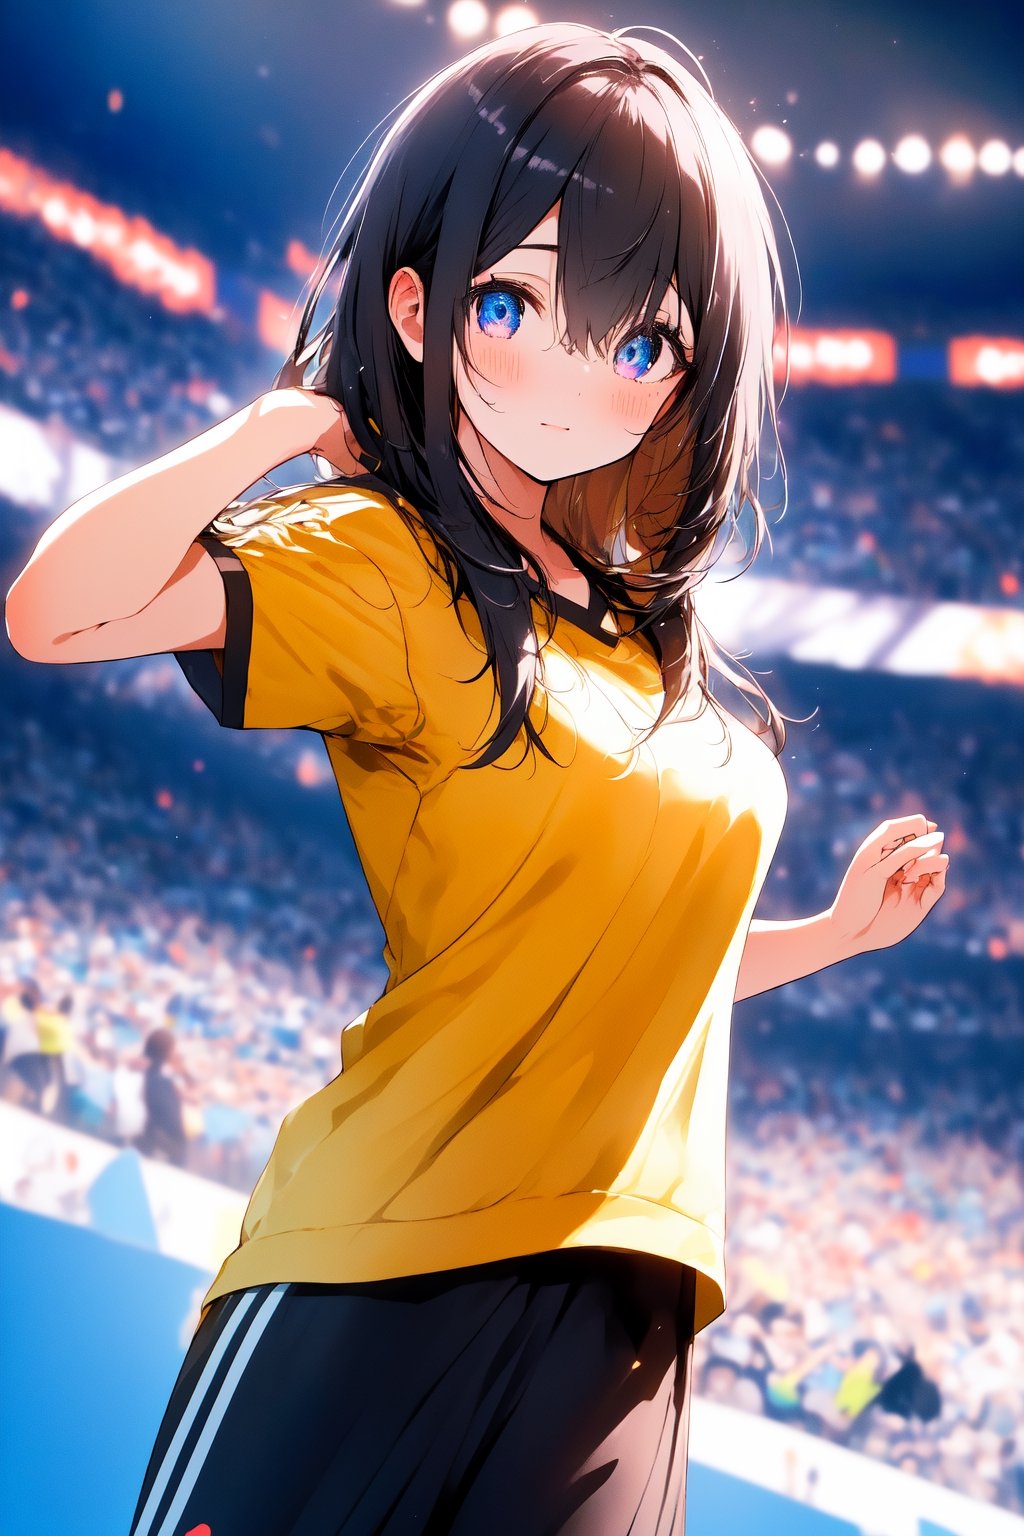 ((sfw, masterpiece, best qualit, beautiful detailed eyes, ultra-detailed, finely detail, highres)), 8k, 1 girl, cute, kawaii, black hair, dynamic angle, She is a spectator watching the soccer game, large audience, multiple people, she is praying